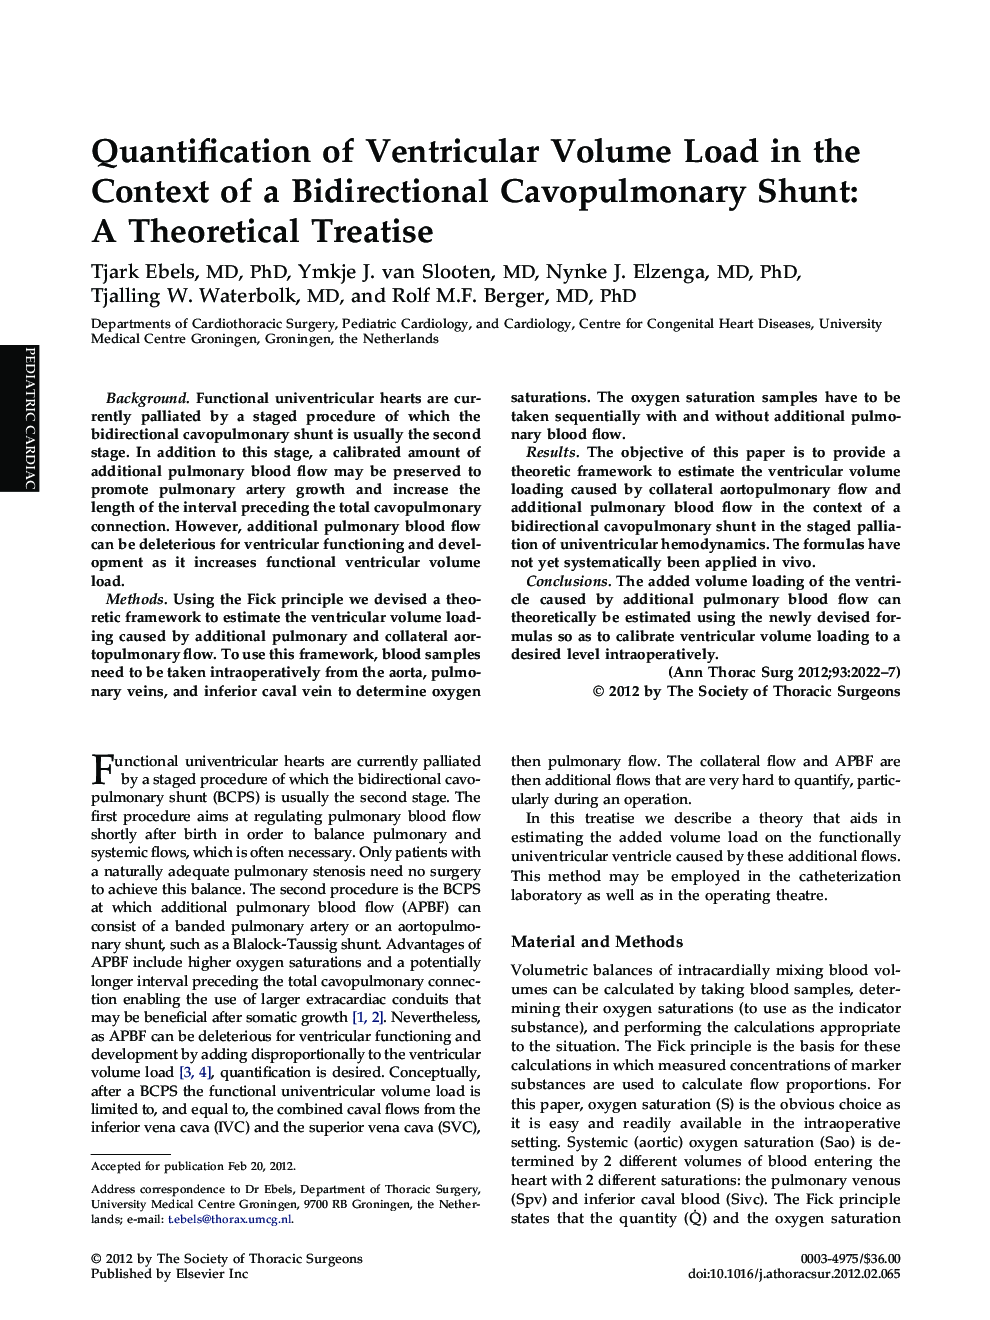 Quantification of Ventricular Volume Load in the Context of a Bidirectional Cavopulmonary Shunt: A Theoretical Treatise